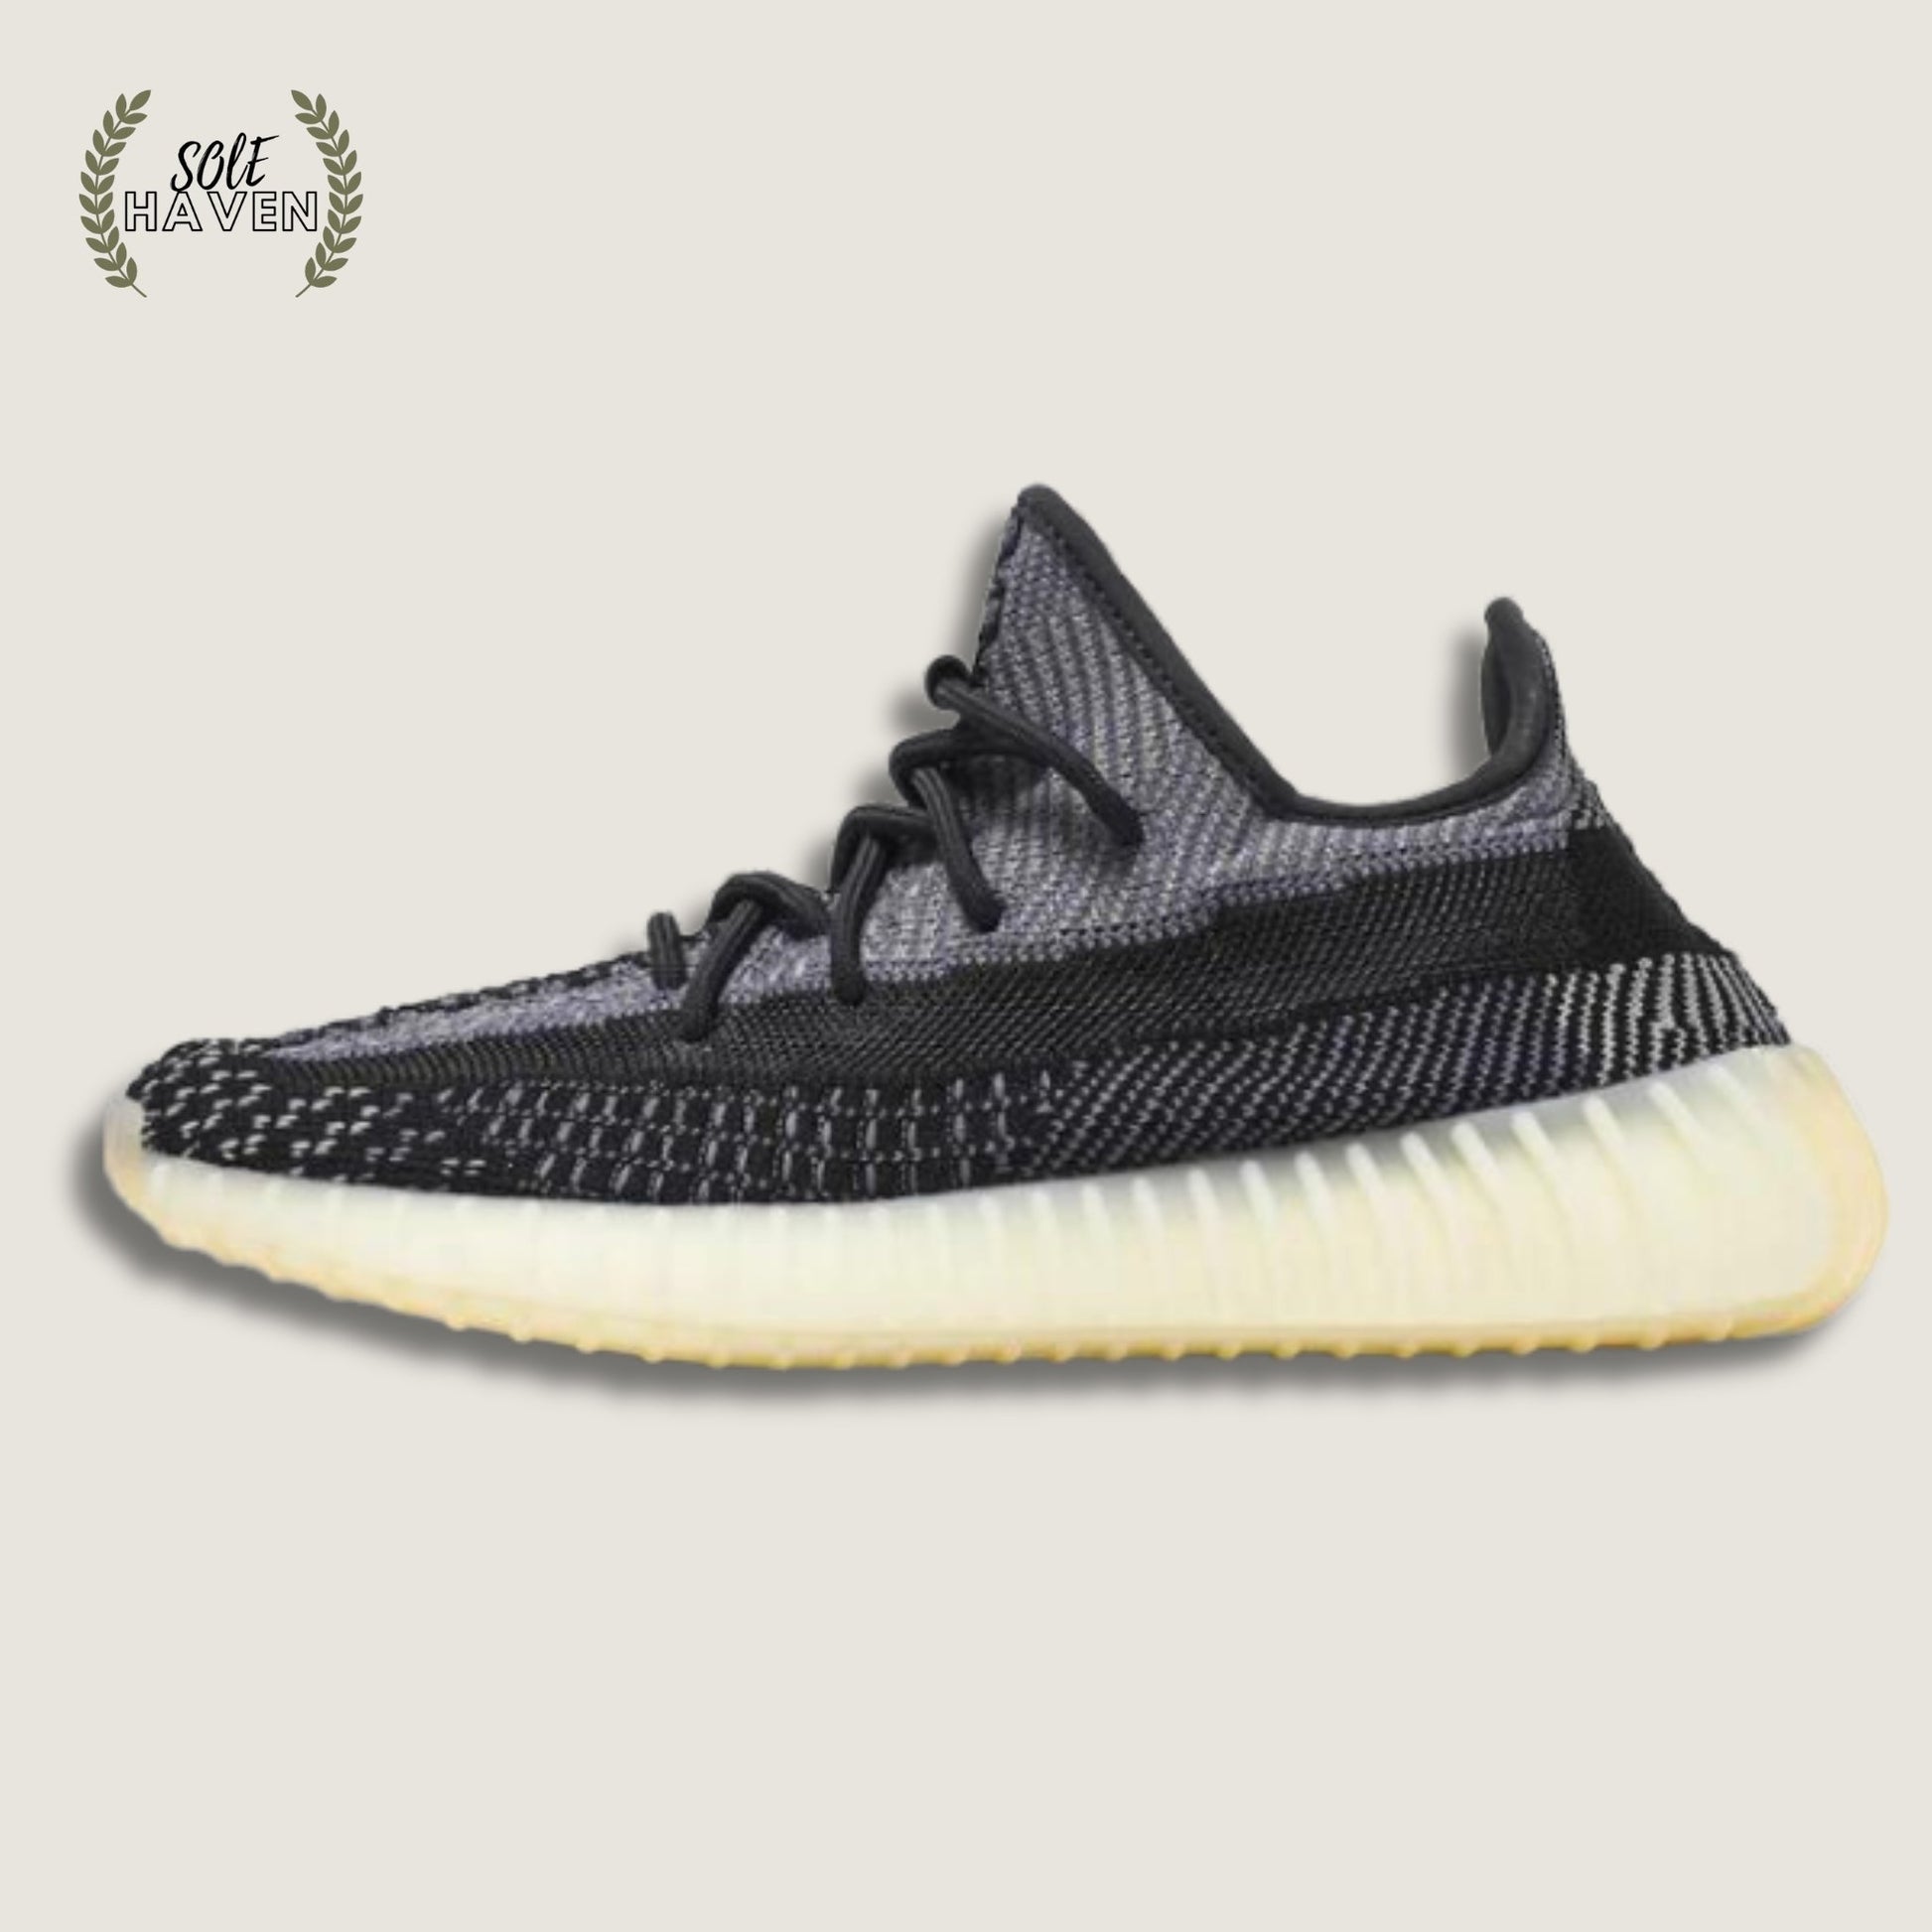 Yeezy Boost 350 V2 Carbon - Sole HavenShoesYeezy